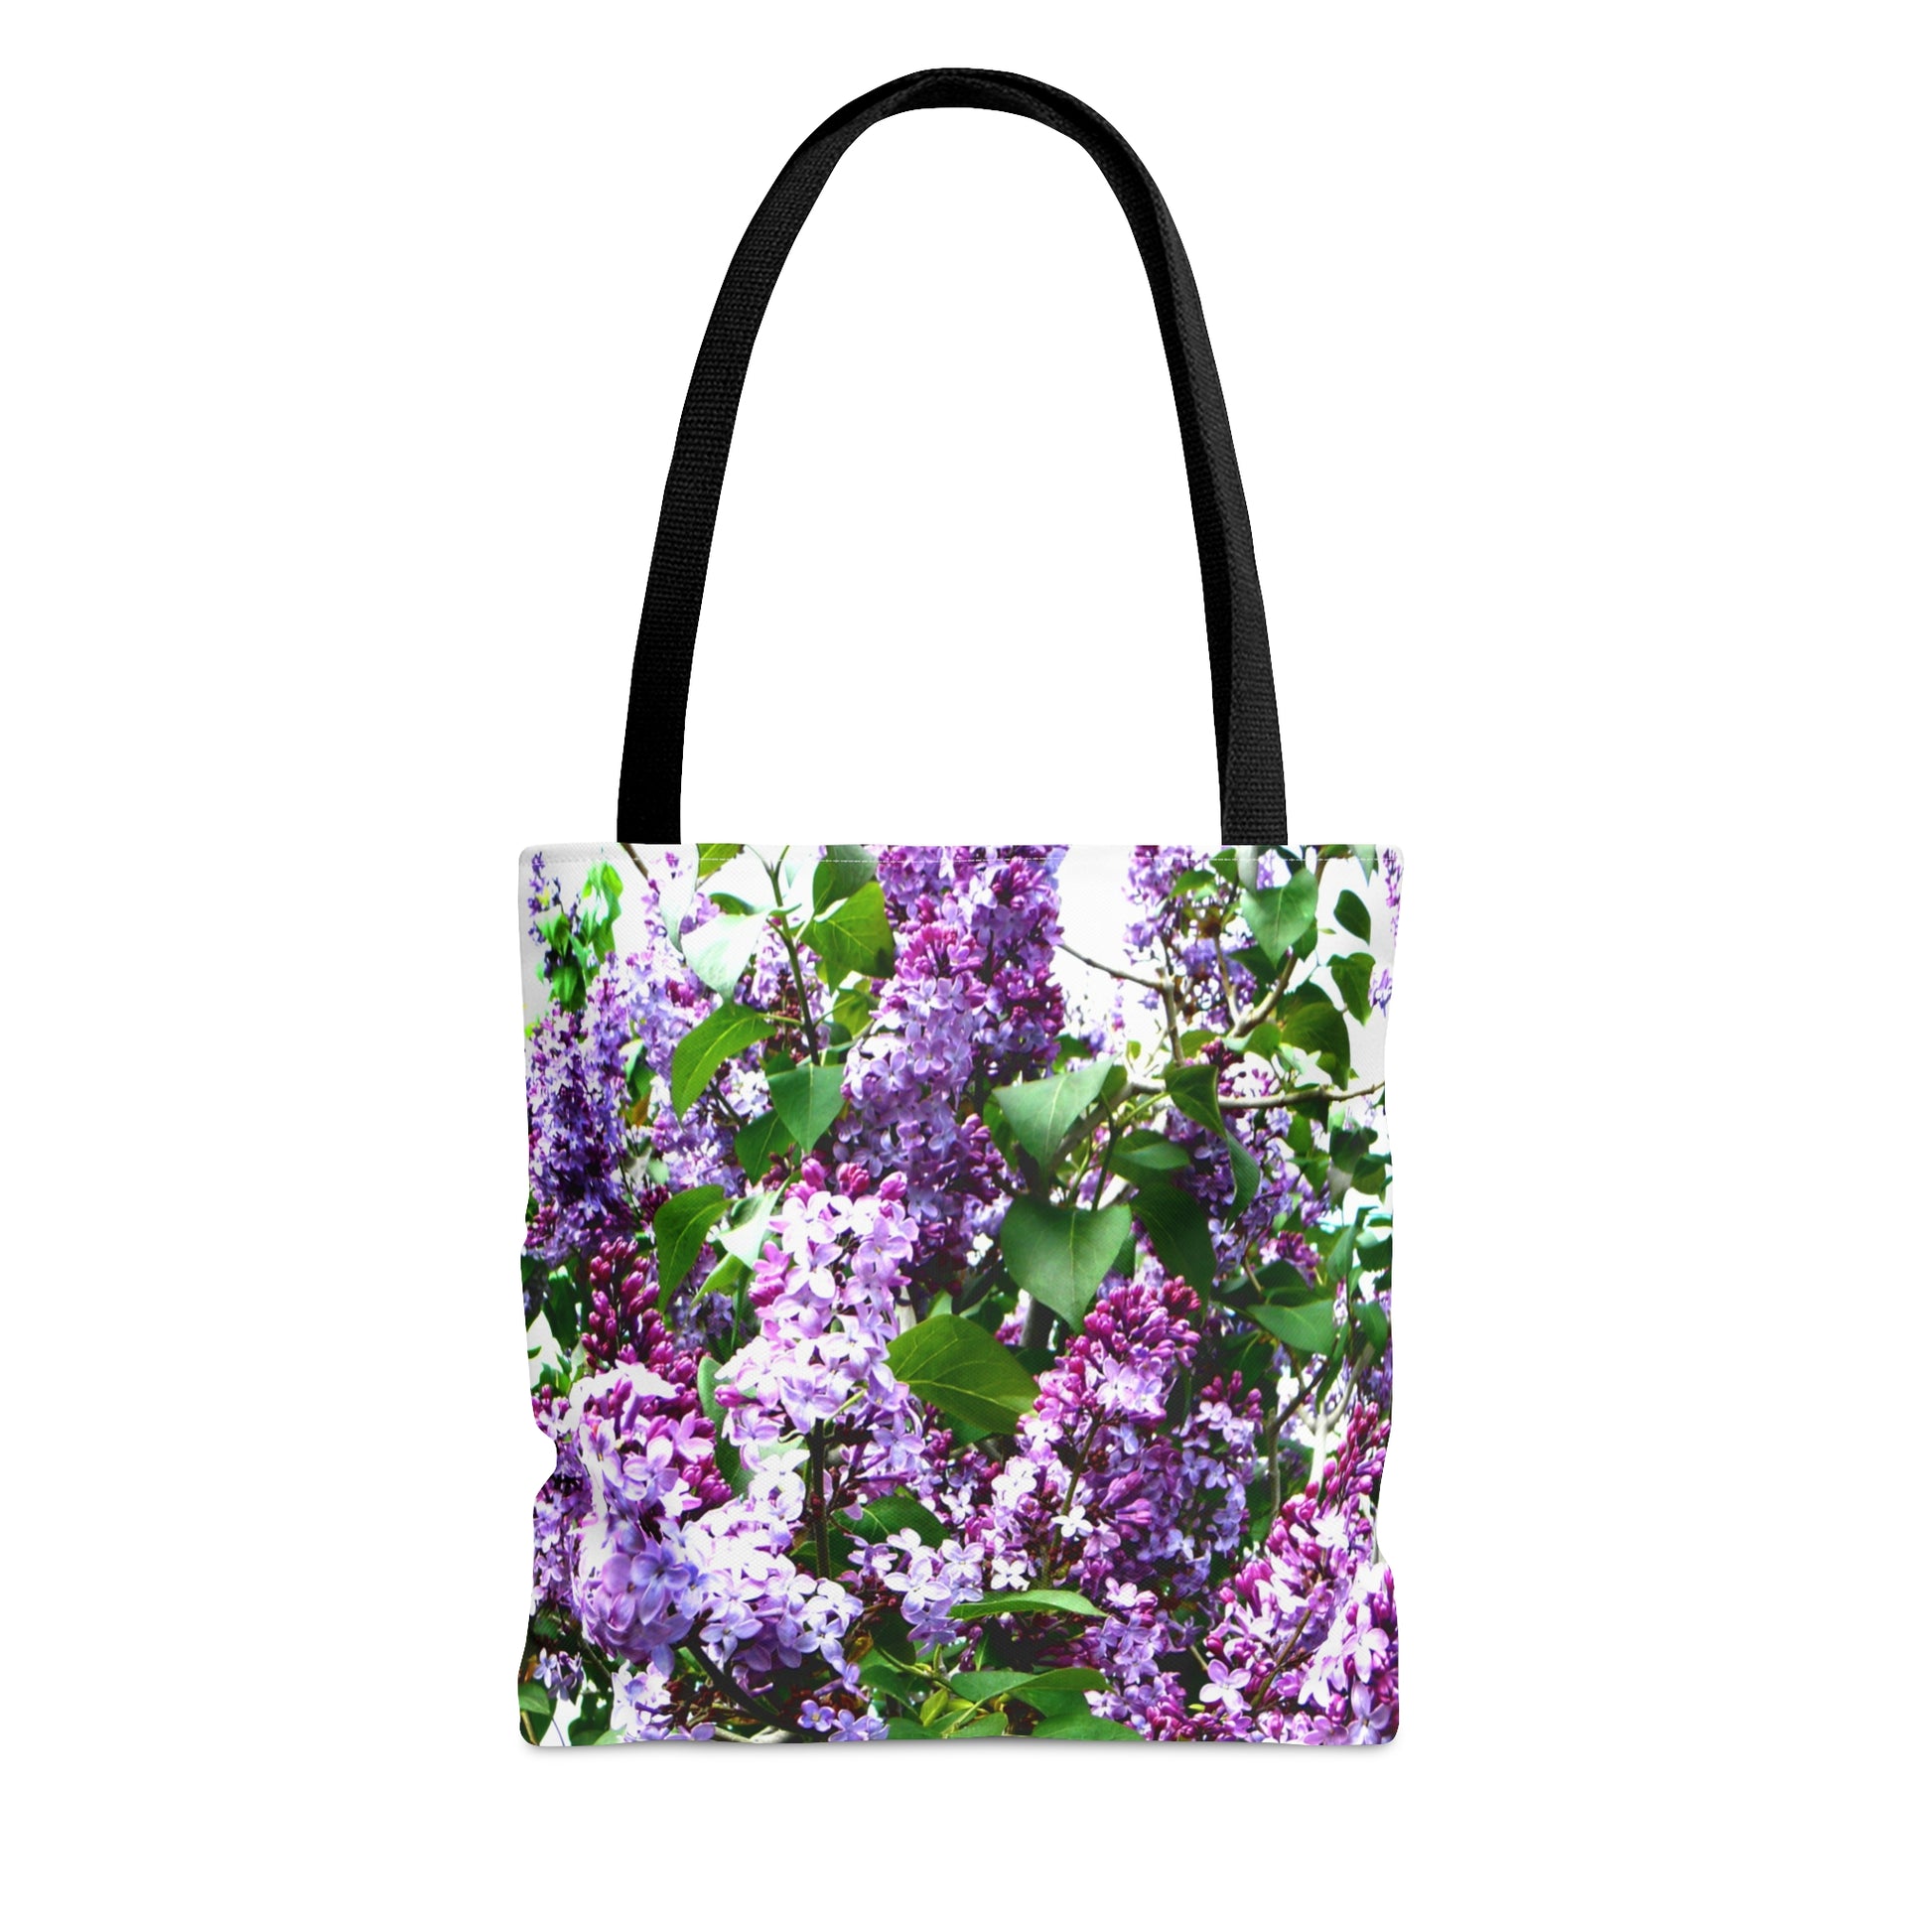 Large tote bag - front